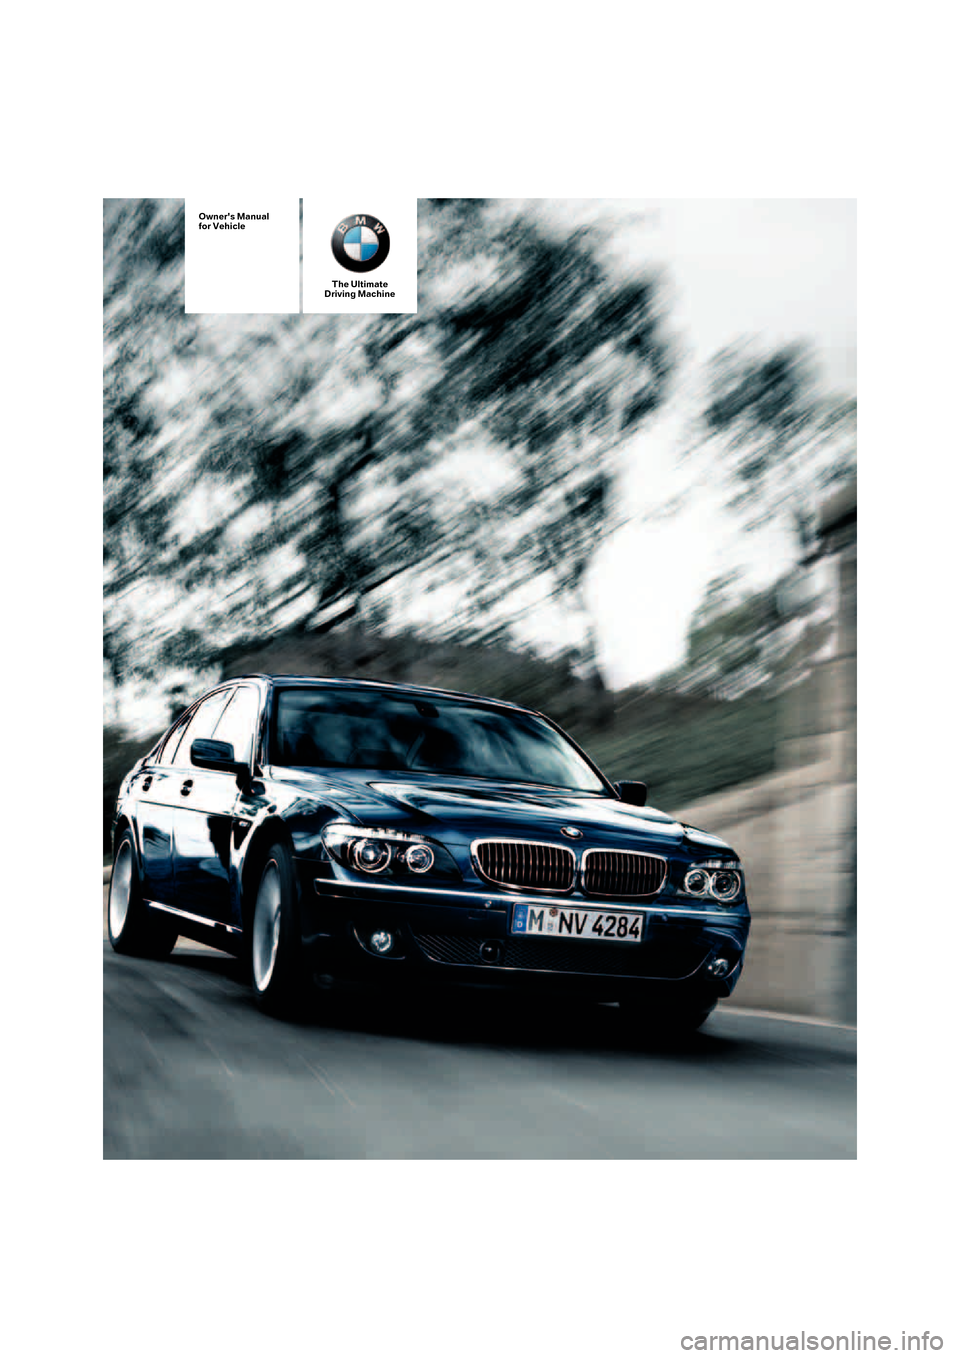 BMW 750LI 2008 E66 Owners Manual Owners Manual
for Vehicle
The Ultimate
Driving Machine 